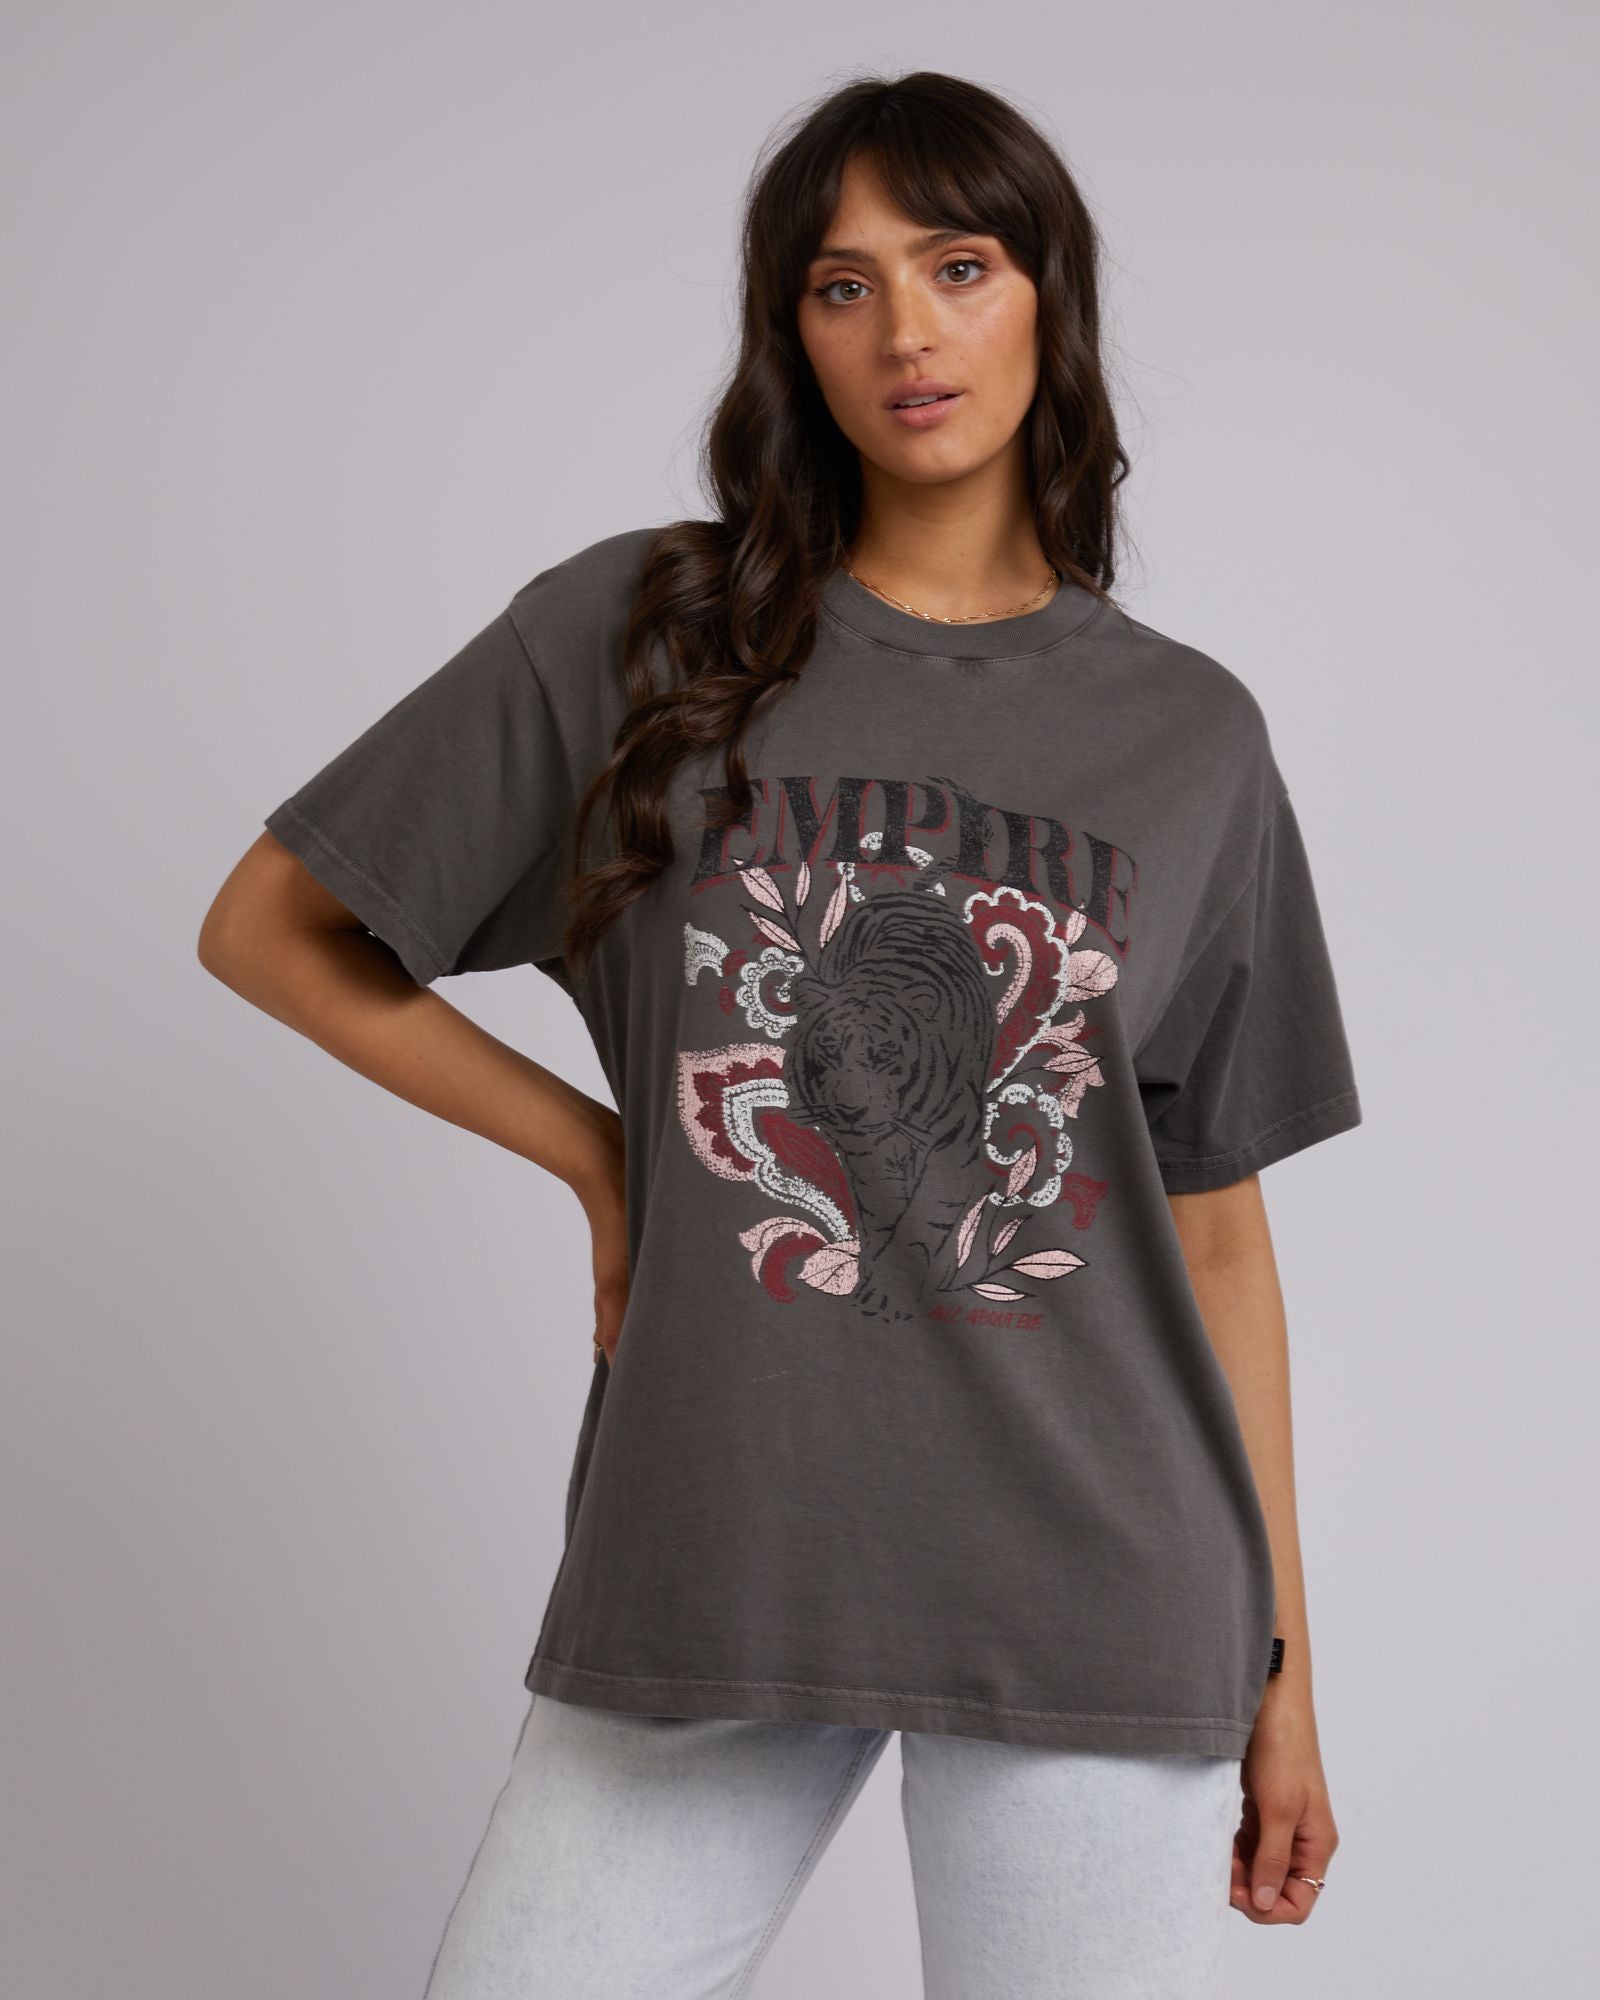 All About Eve Empire Oversized Tee